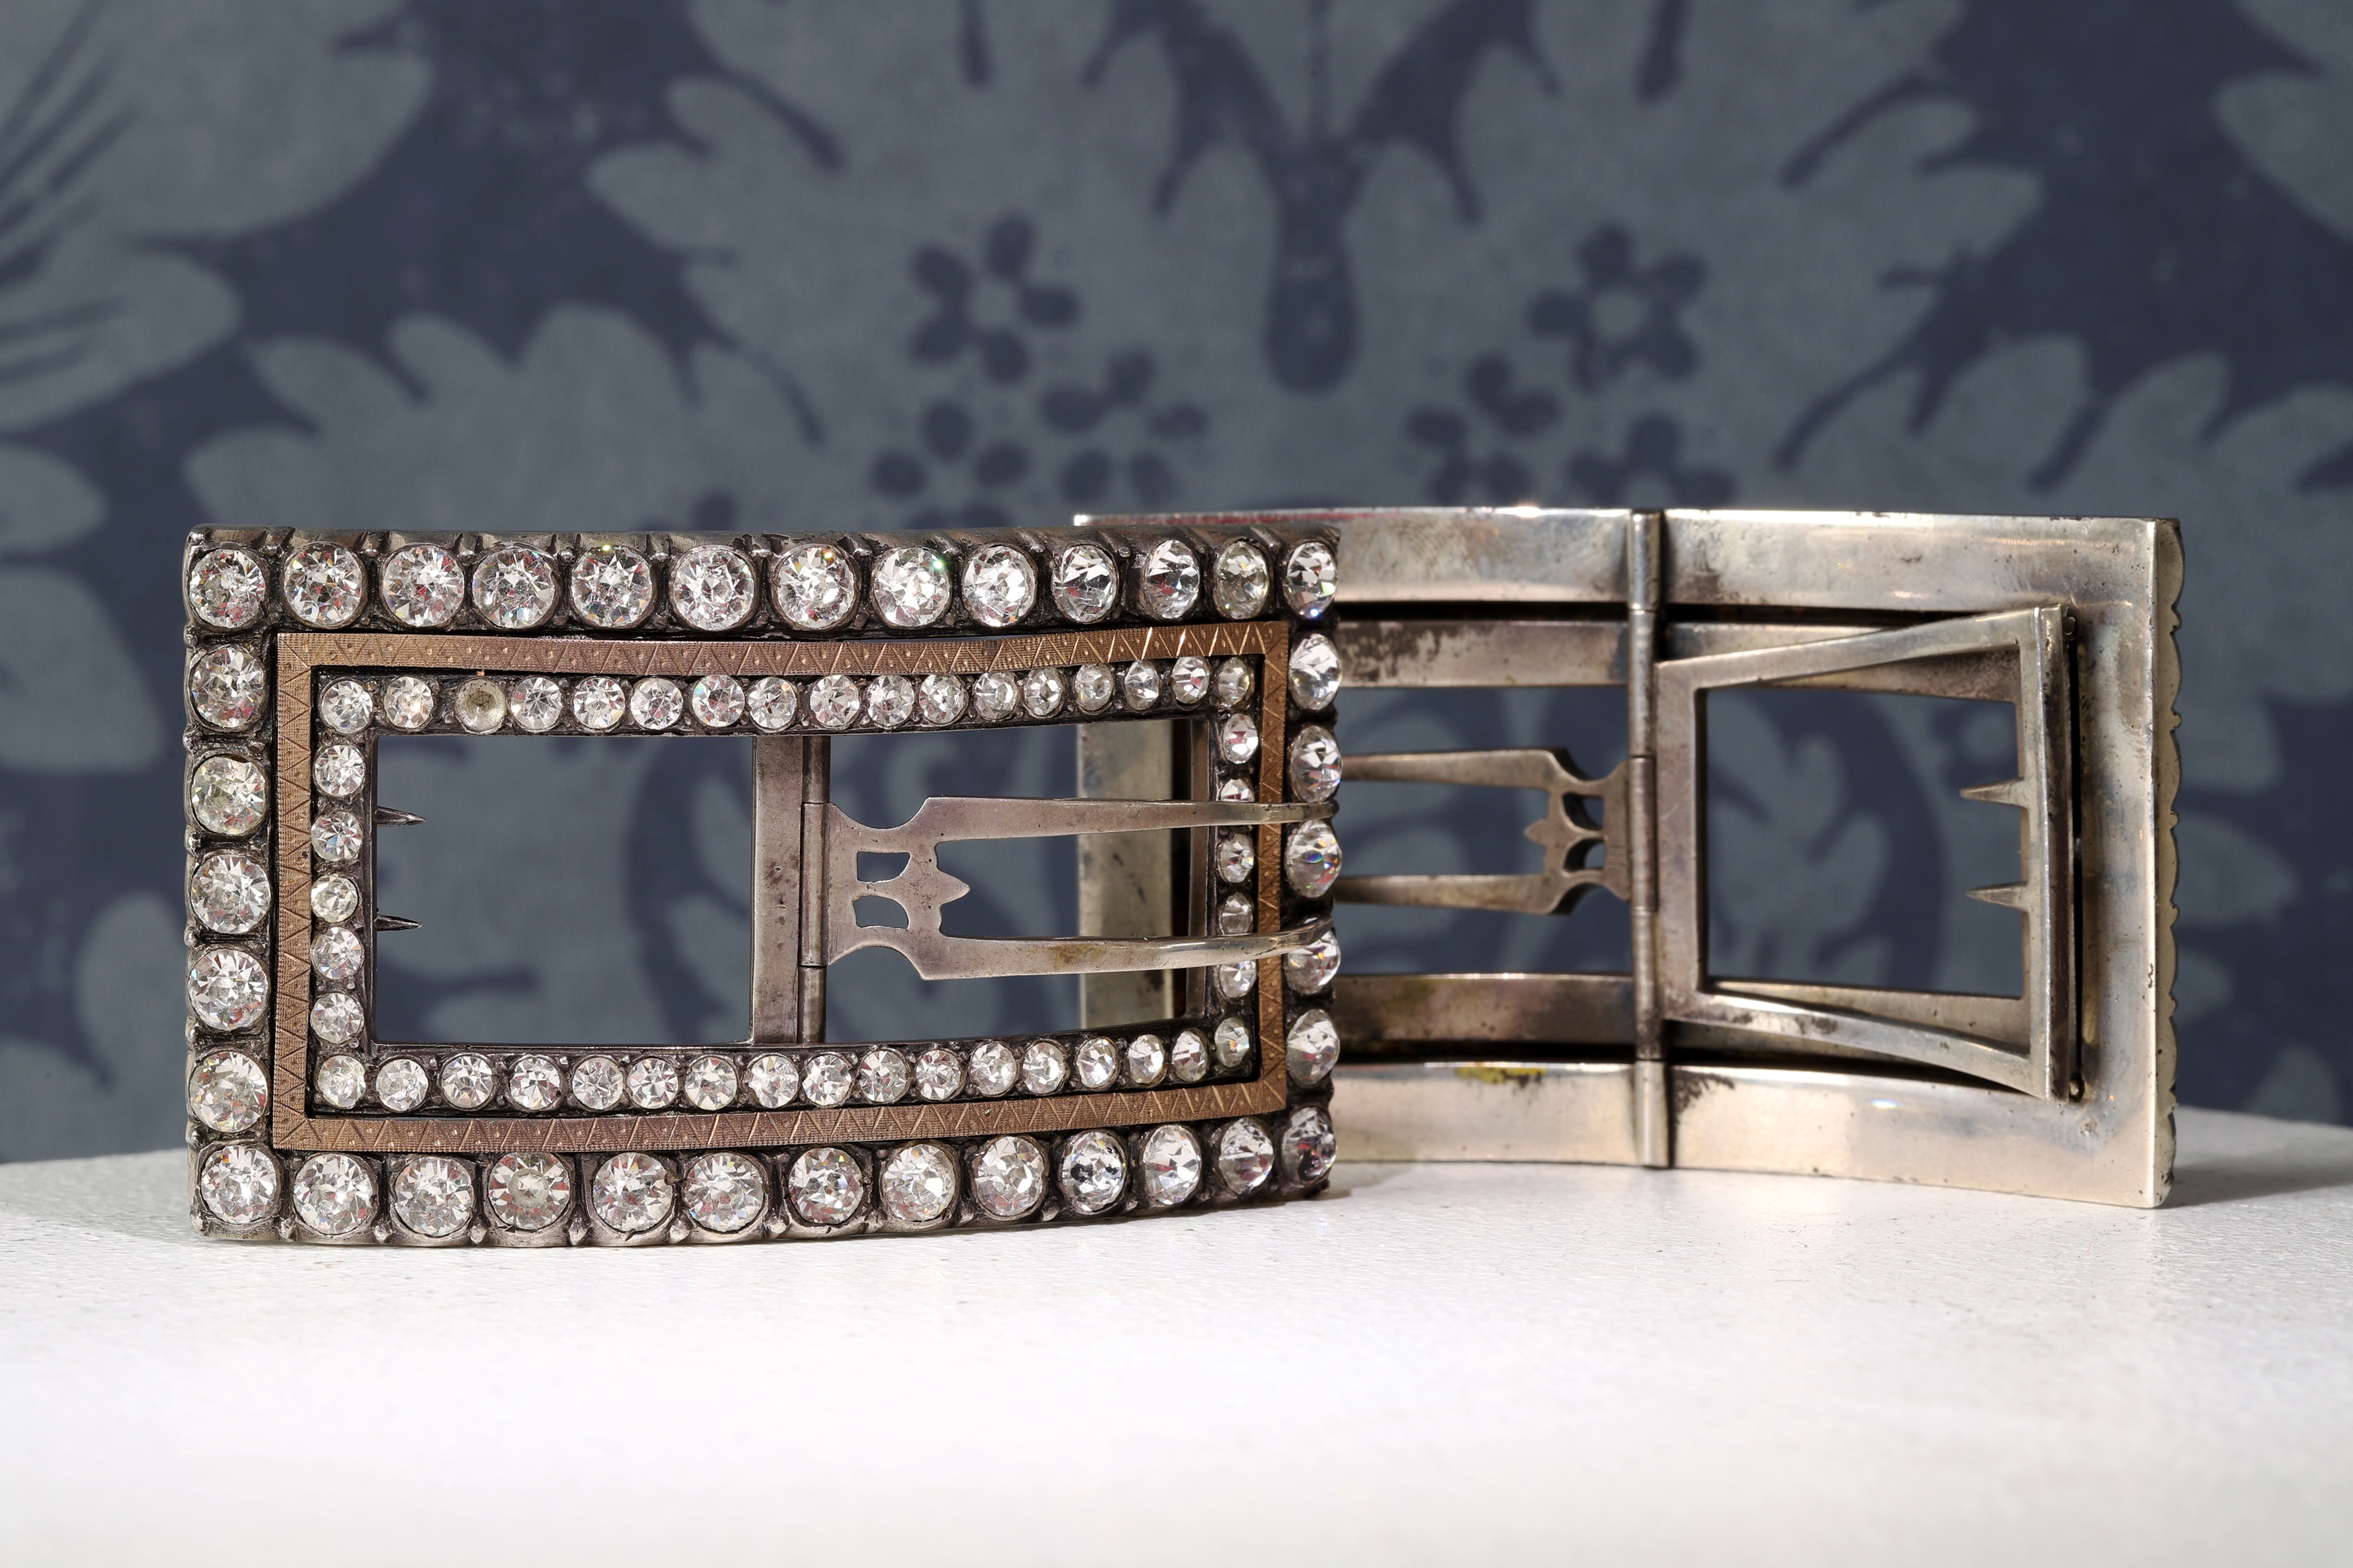 A pair of silver shoe buckles (£70-90)